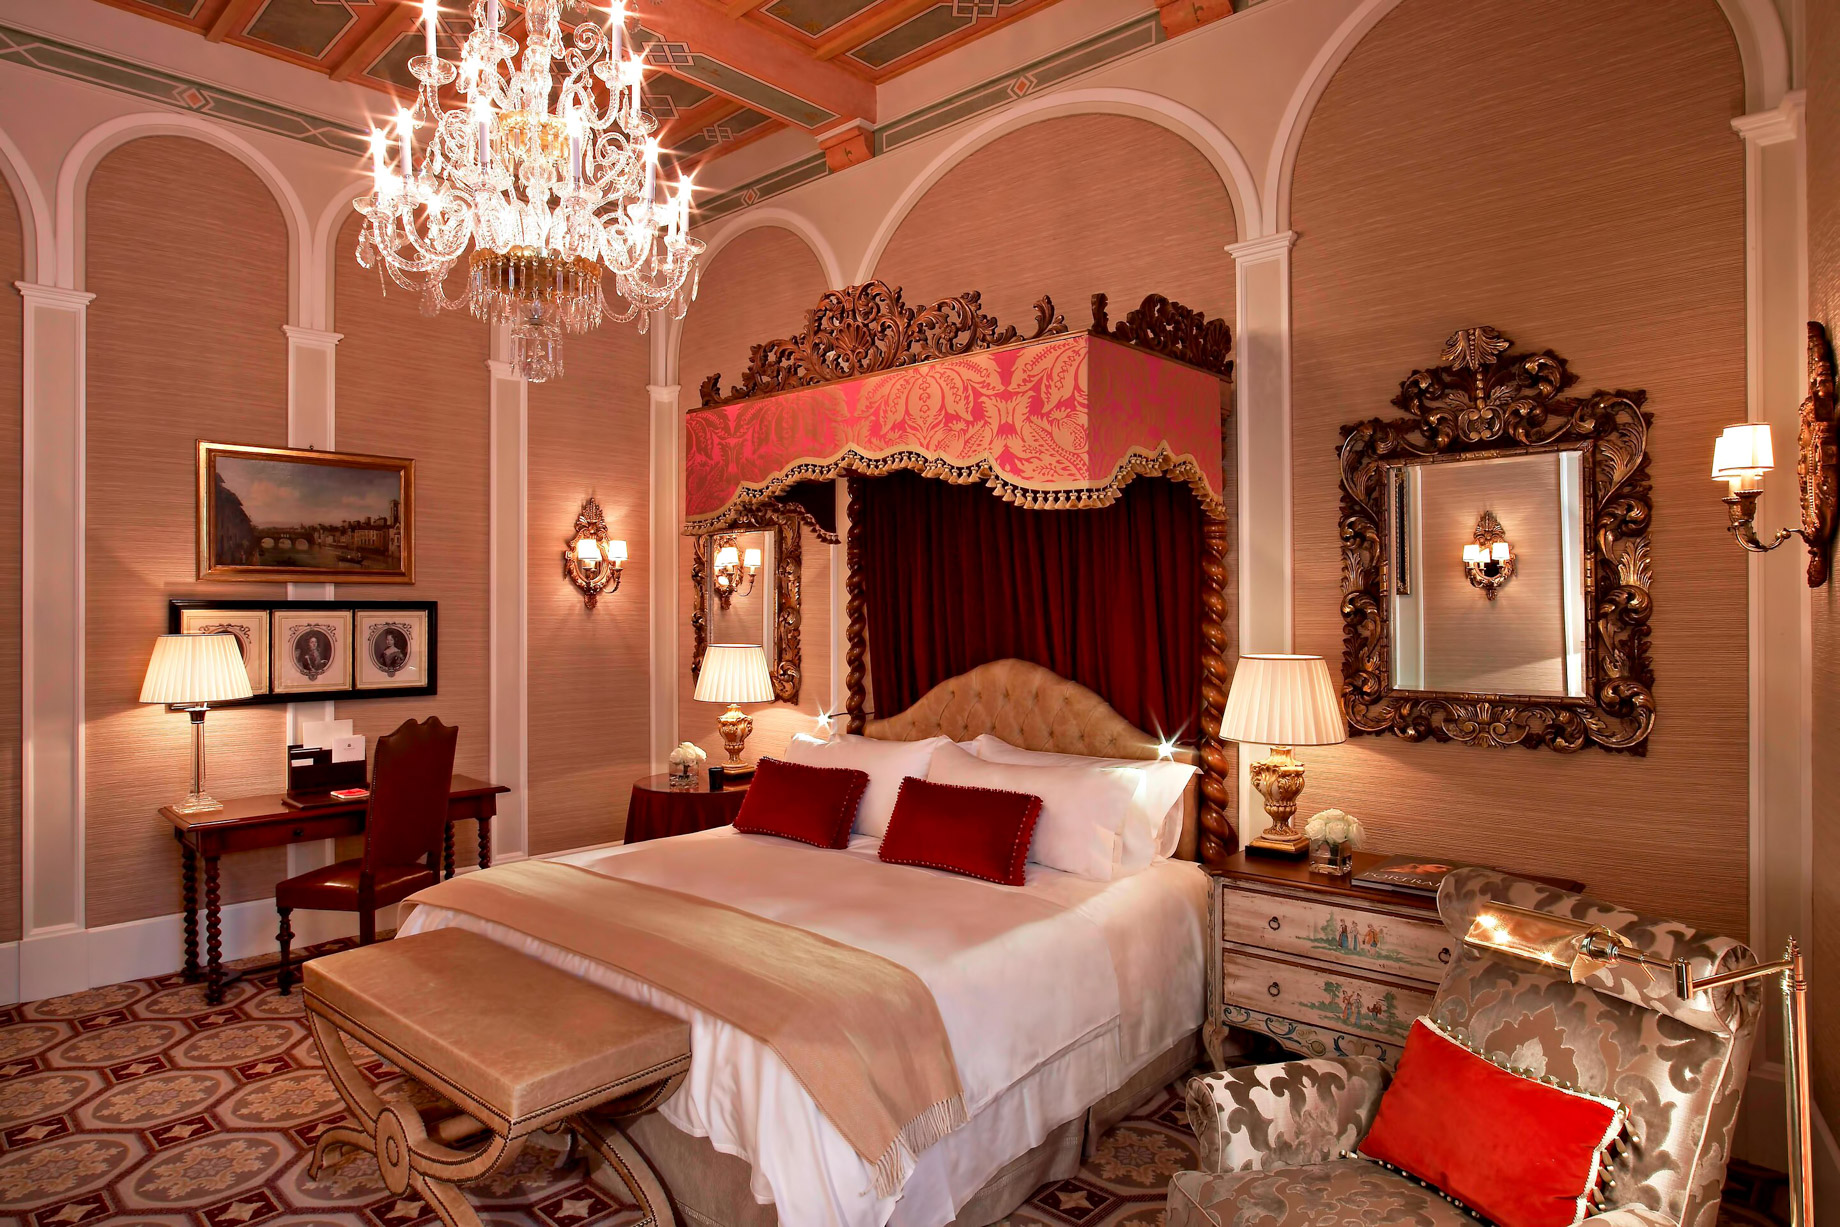 The St. Regis Florence Hotel - Florence, Italy - Premium Deluxe Renaissance style